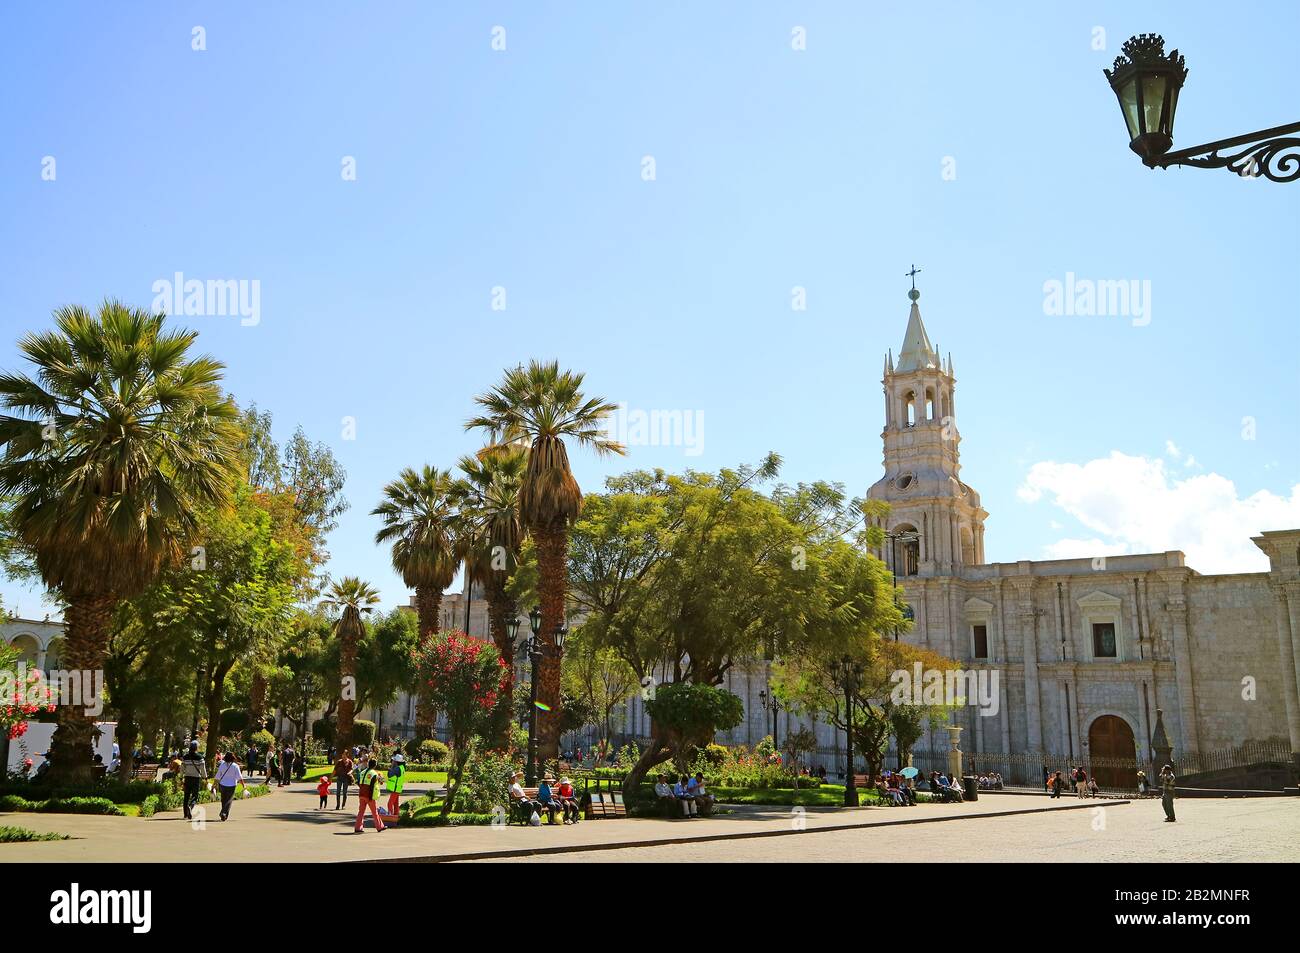 Plaza de Armas, the Main Square of Arequipa with the Basilica Cathedral of Arequipa, Peru, South America Stock Photo